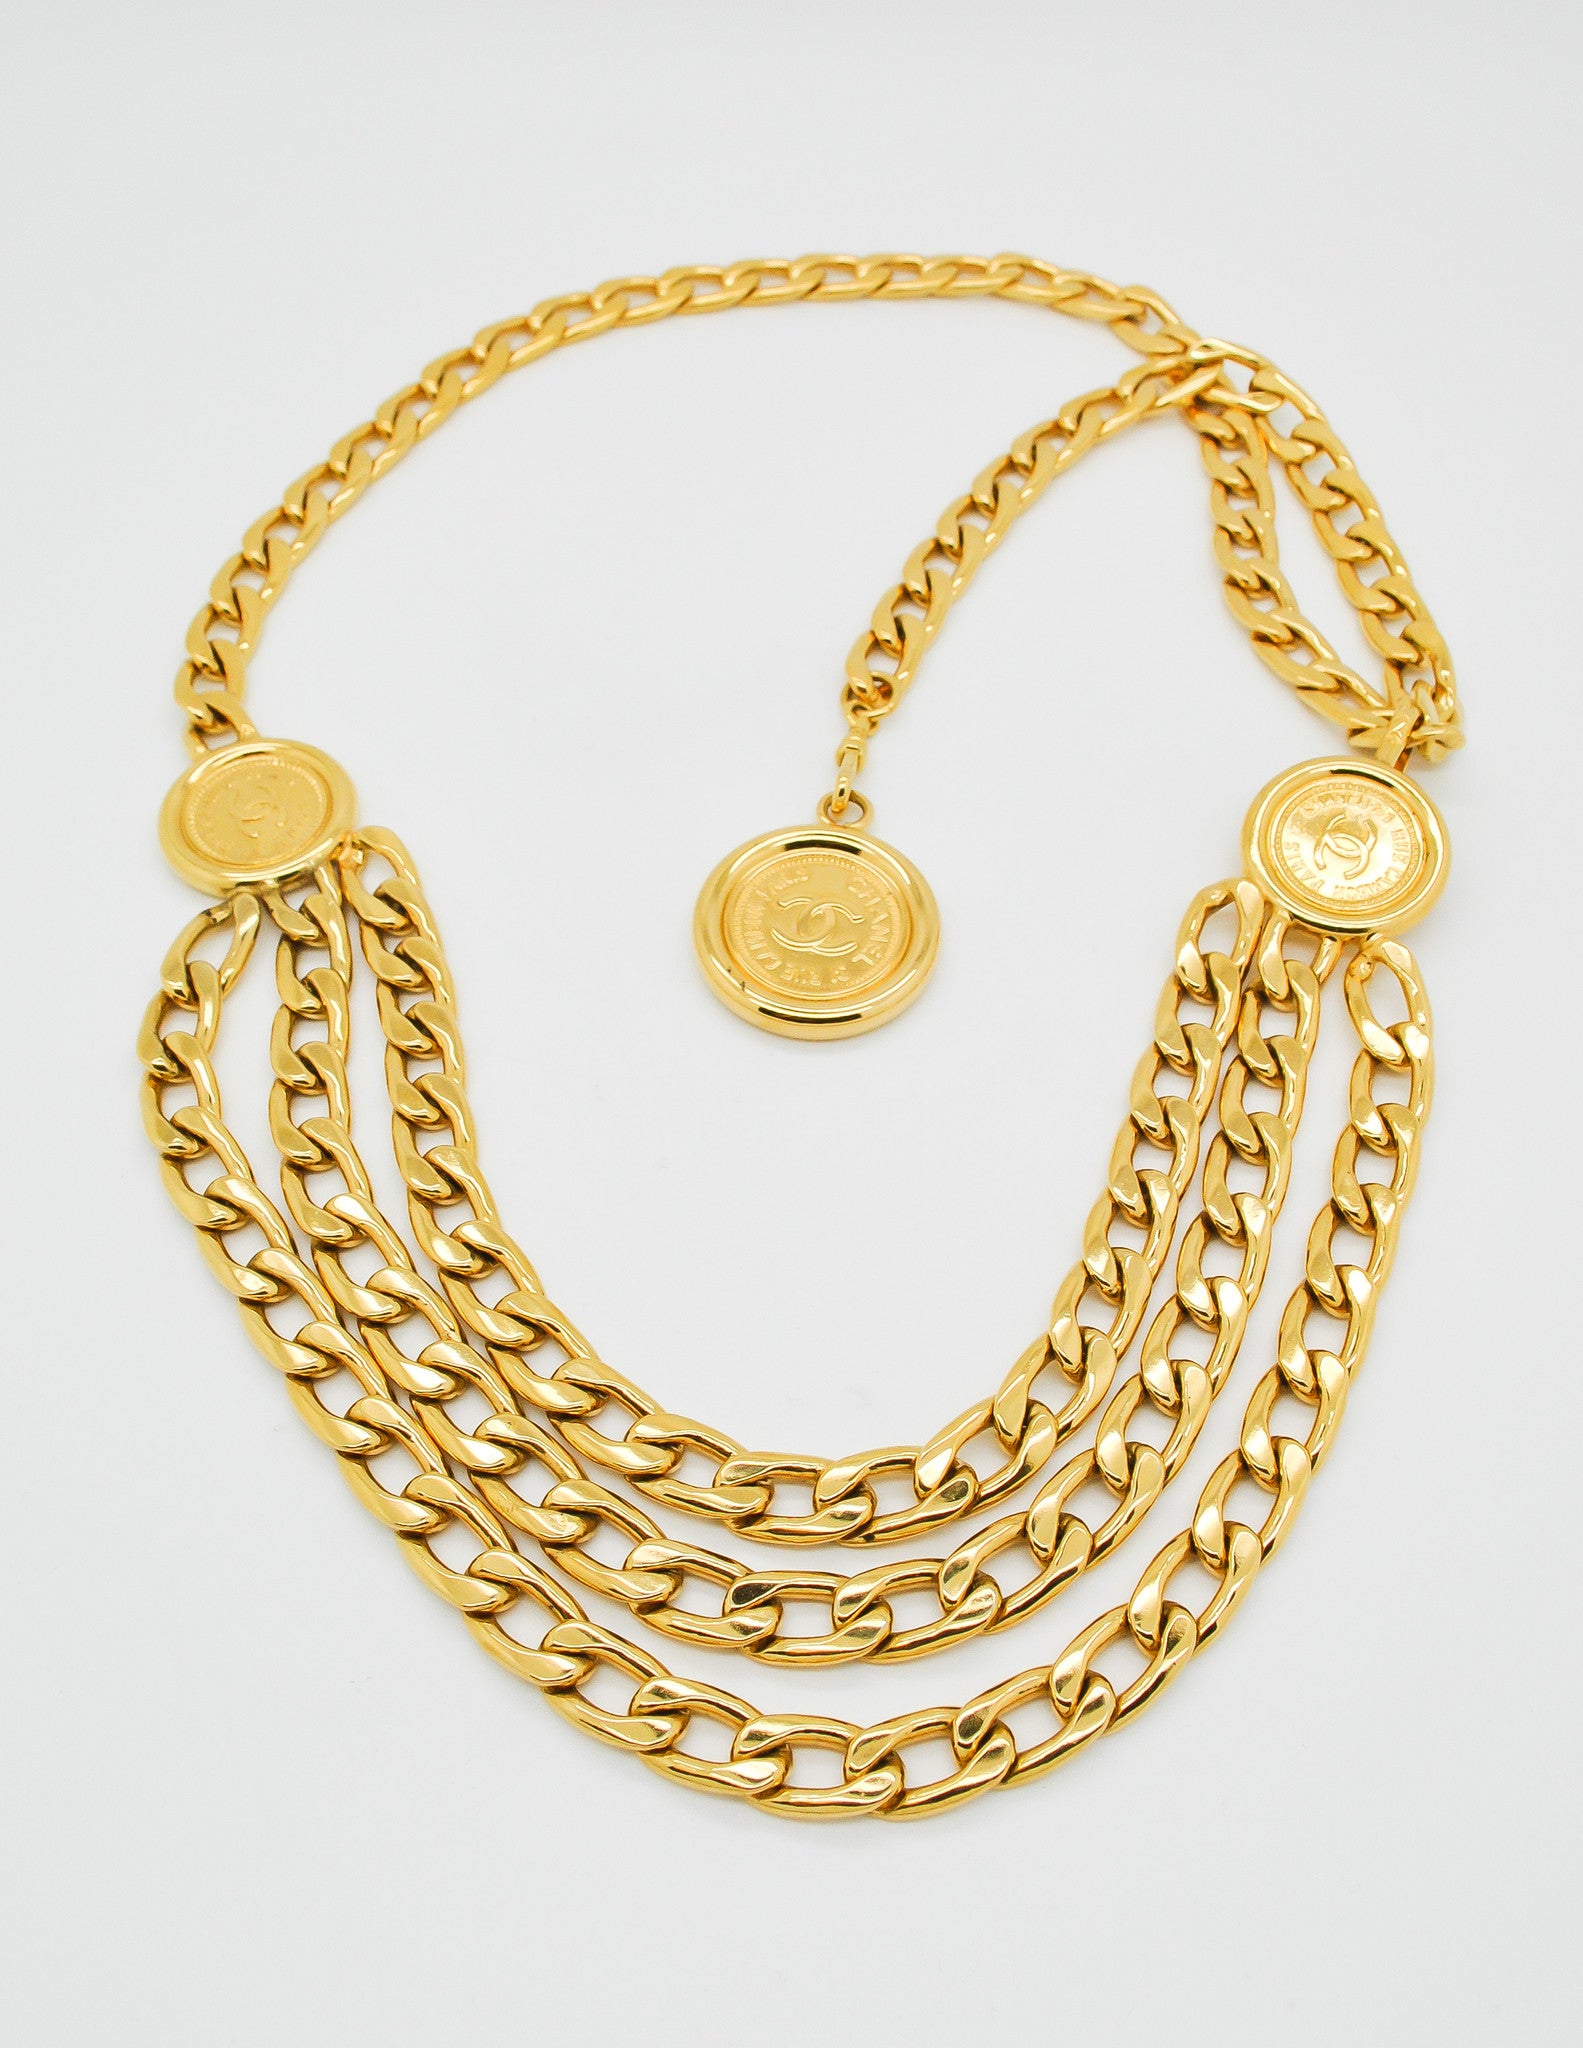 Chanel Vintage Gold Triple Chain Belt - from Amarcord Vintage Fashion